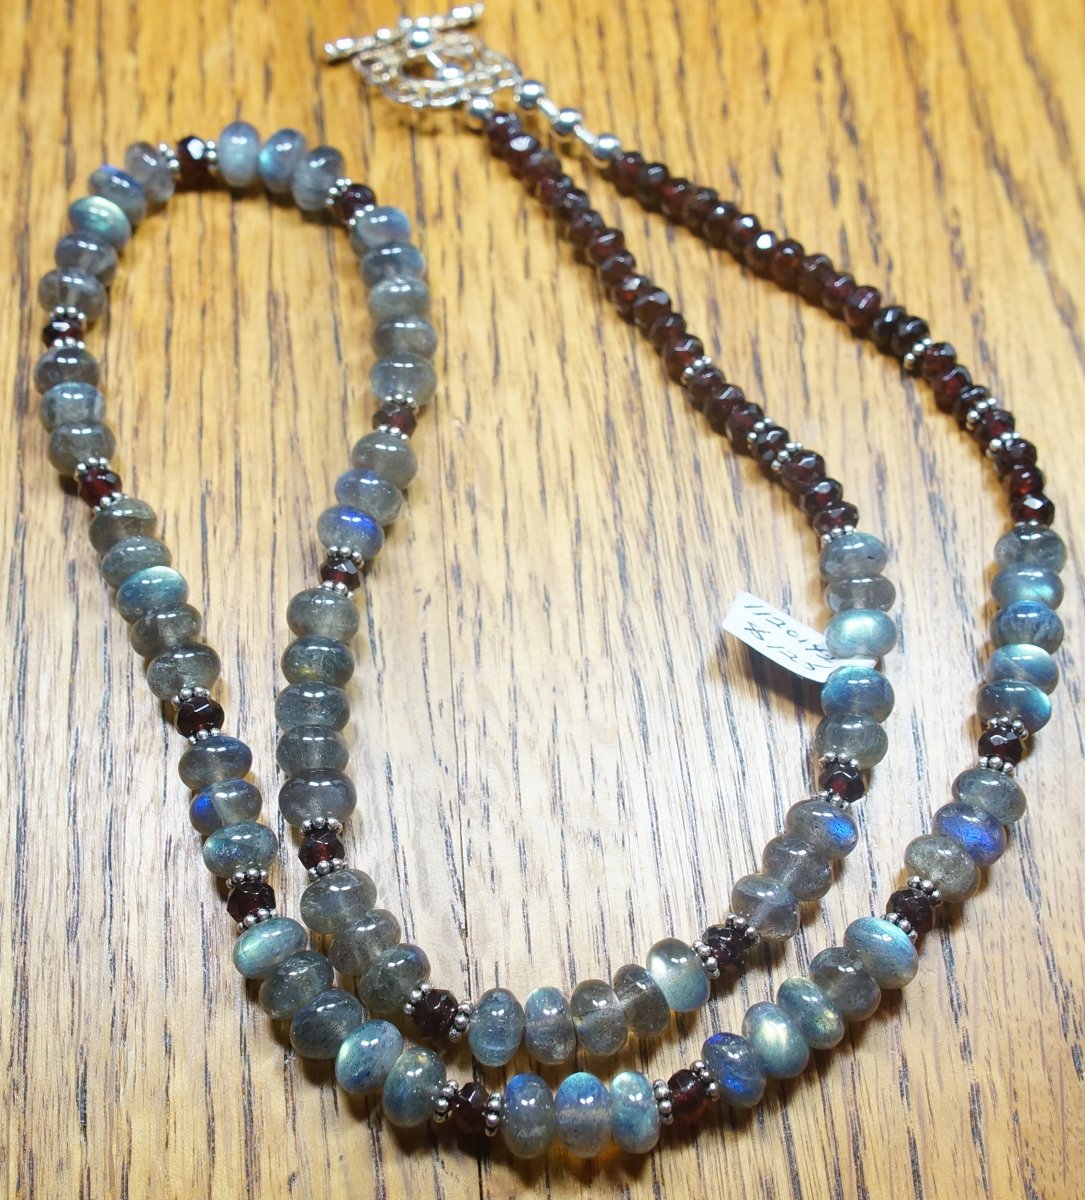 Scaled image Labradorite and Garnet.JPG: Item #1120142. $125. Labradorite Rondelles, Faceted Garnet, Bali spacers, Sterling Silver Beads and Clasp. 28 inches.� 